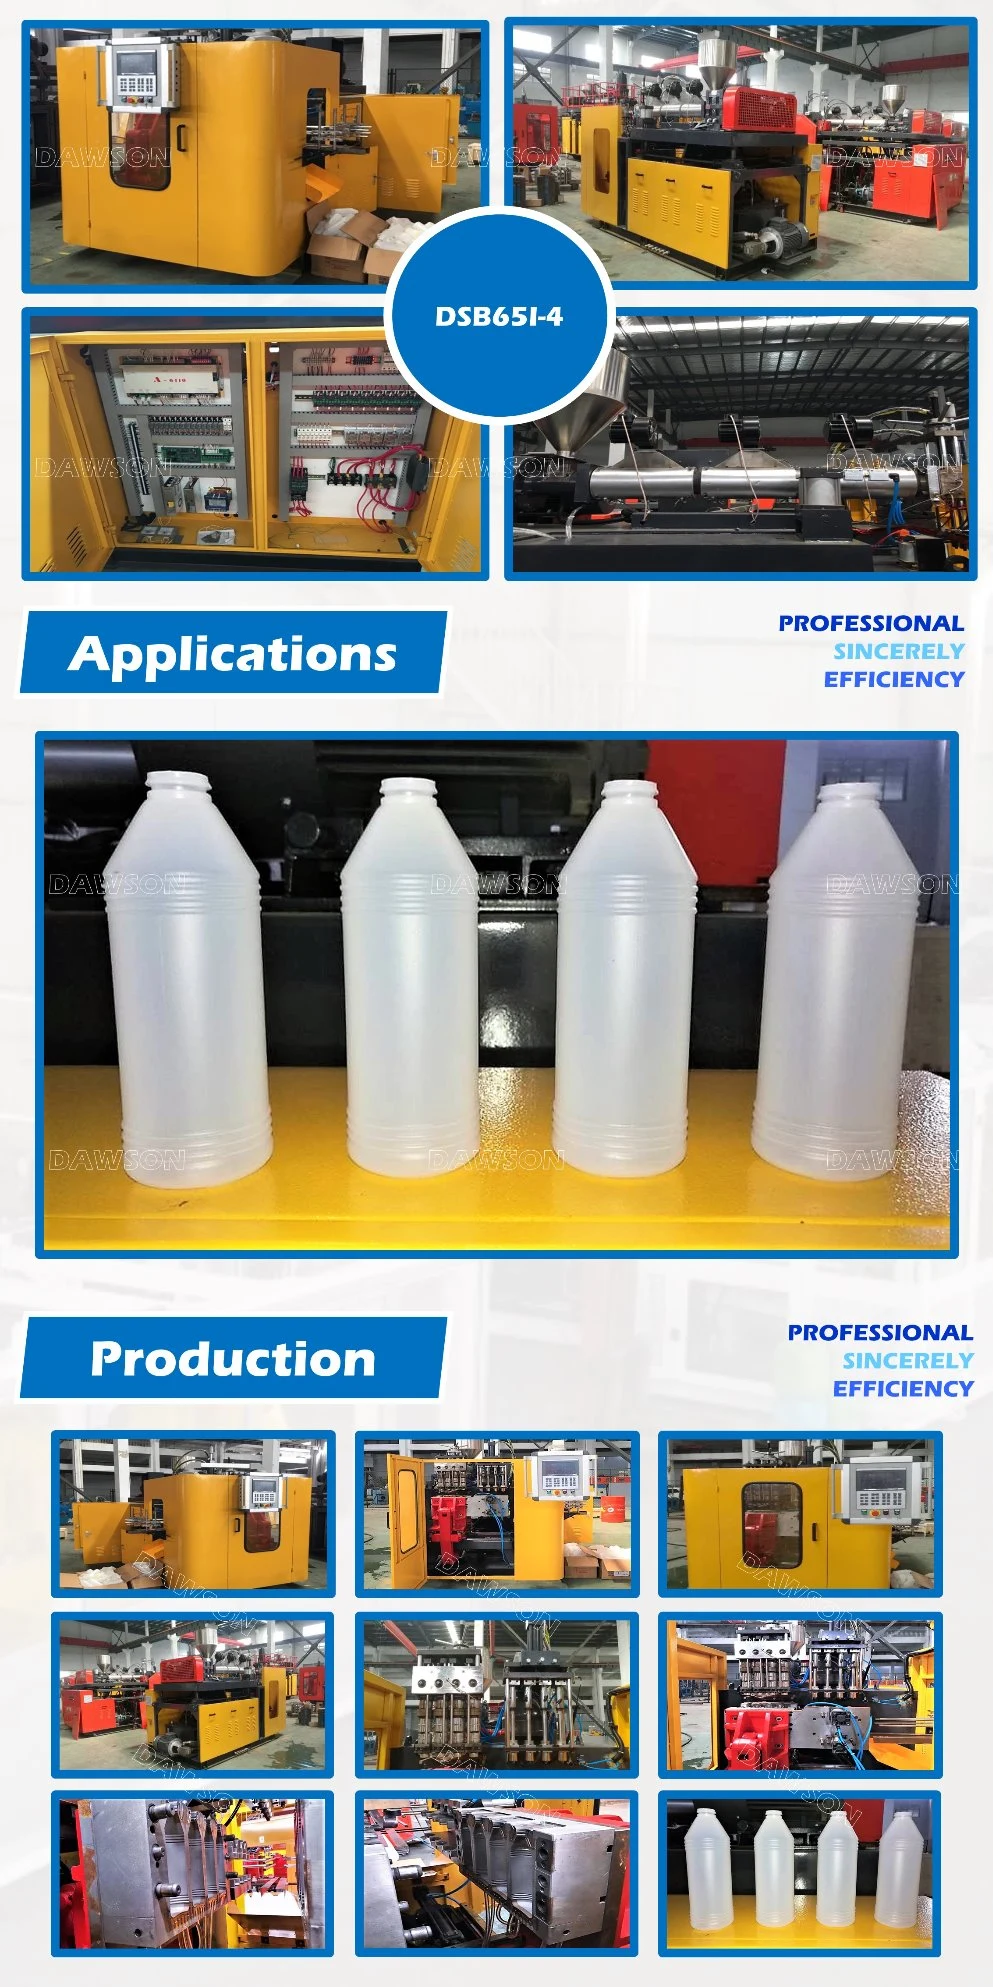 Household Bottle Making Single Station Four Head Extrusion Blow Molding Machine